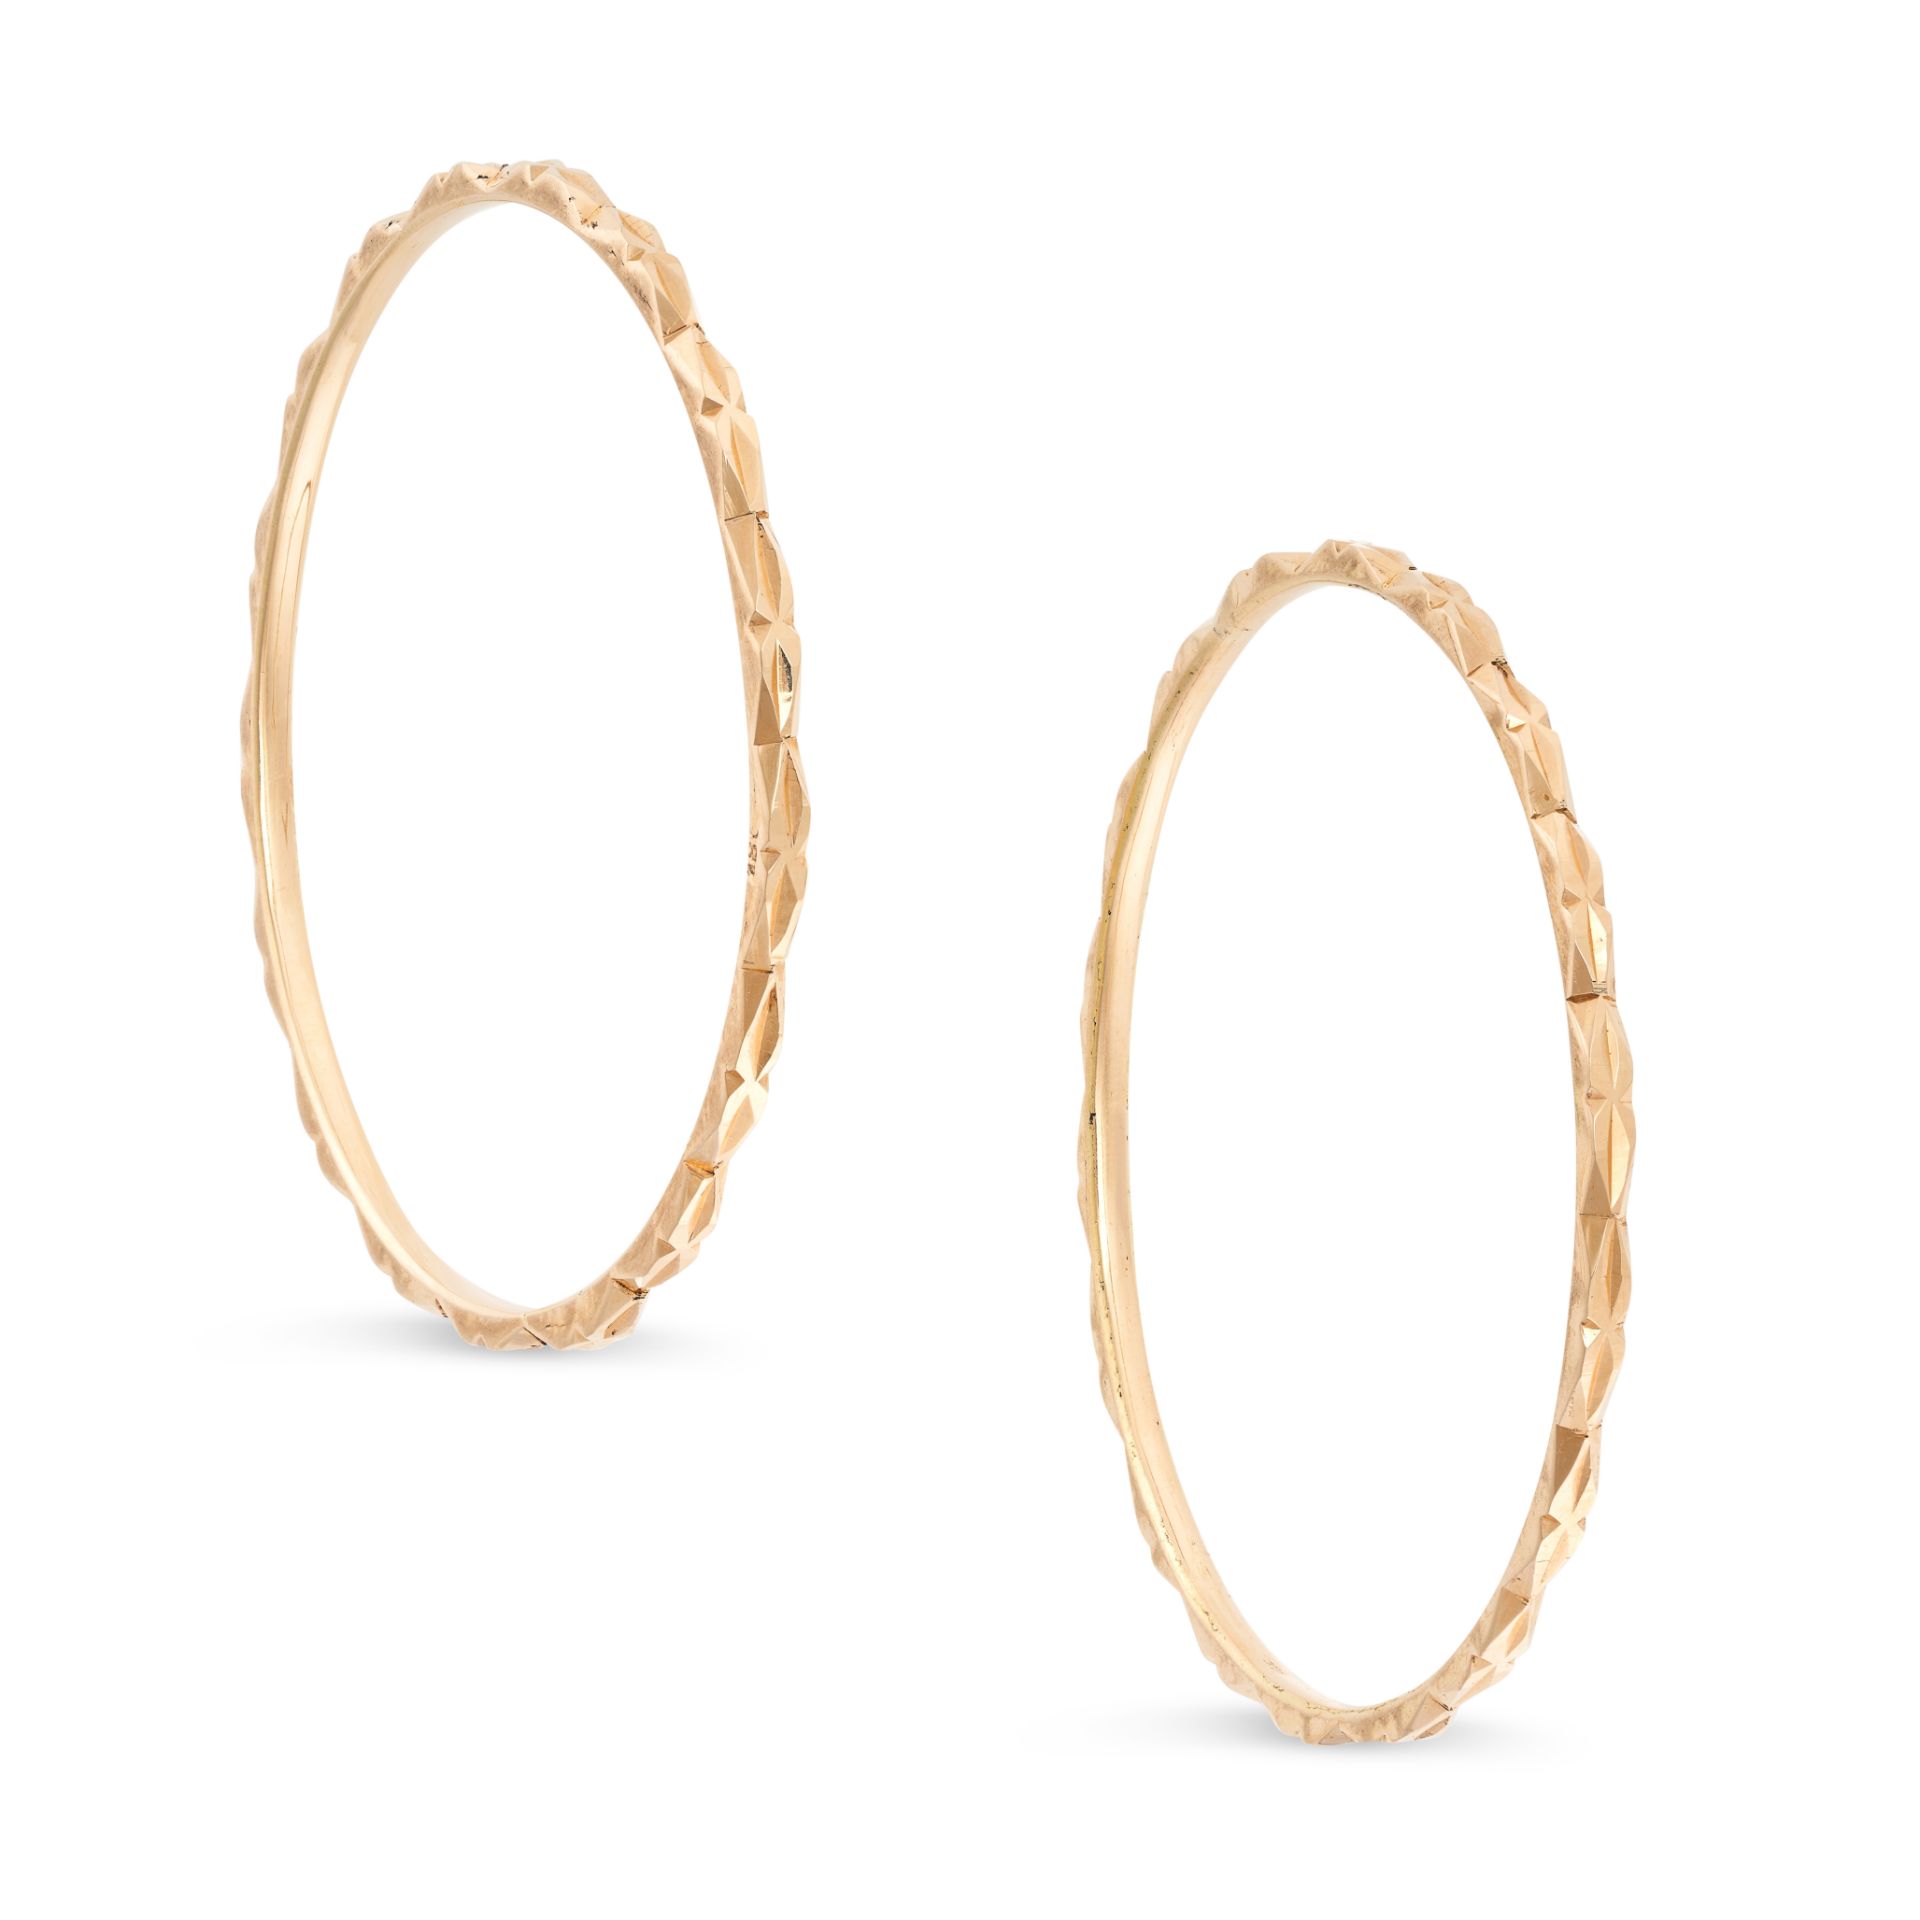 NO RESERVE - TWO VINTAGE GOLD BANGLES in 18ct yellow gold, in bright cut design, stamped 18C,